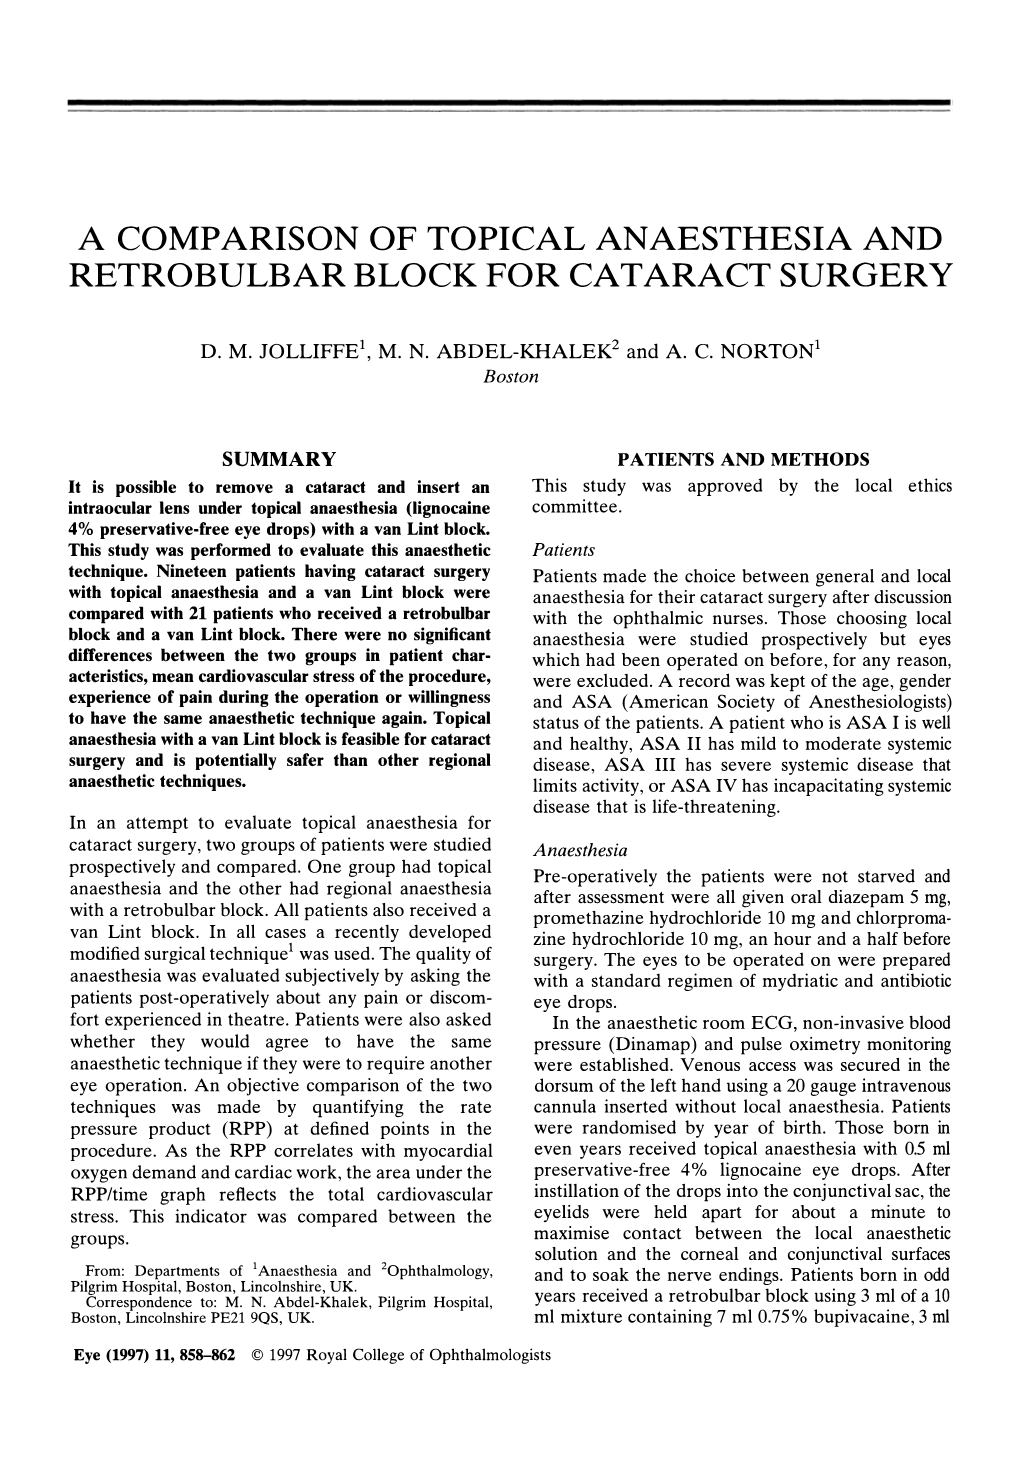 A Comparison of Topical Anaesthesia and Retrobulbar Block for Cataract Surgery